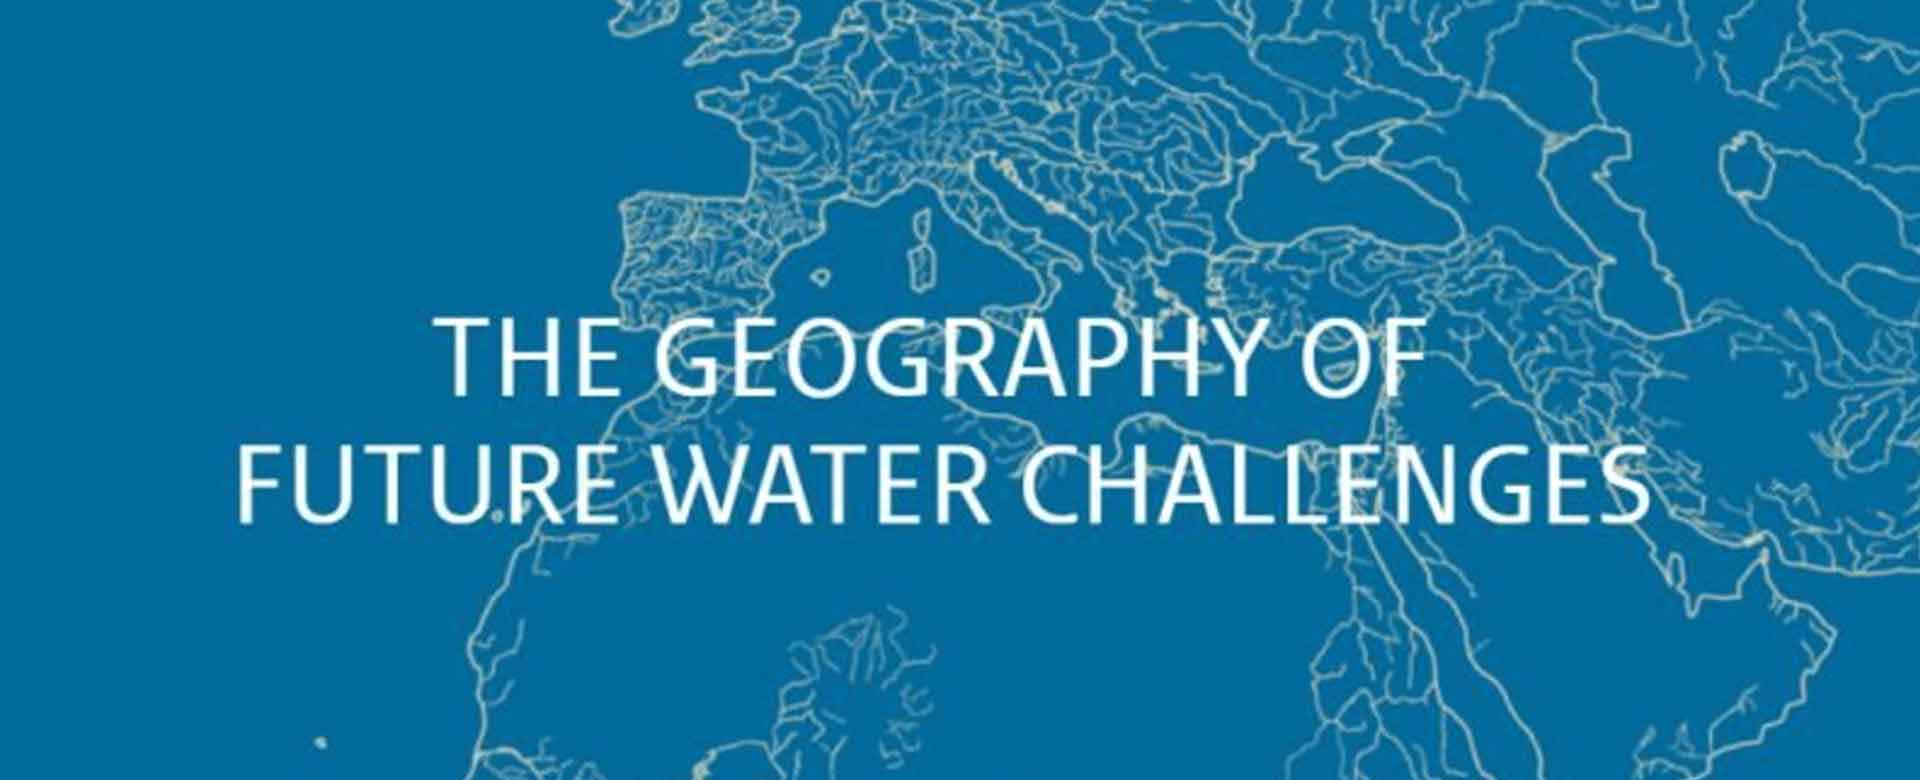 PBL Future Water Challenges